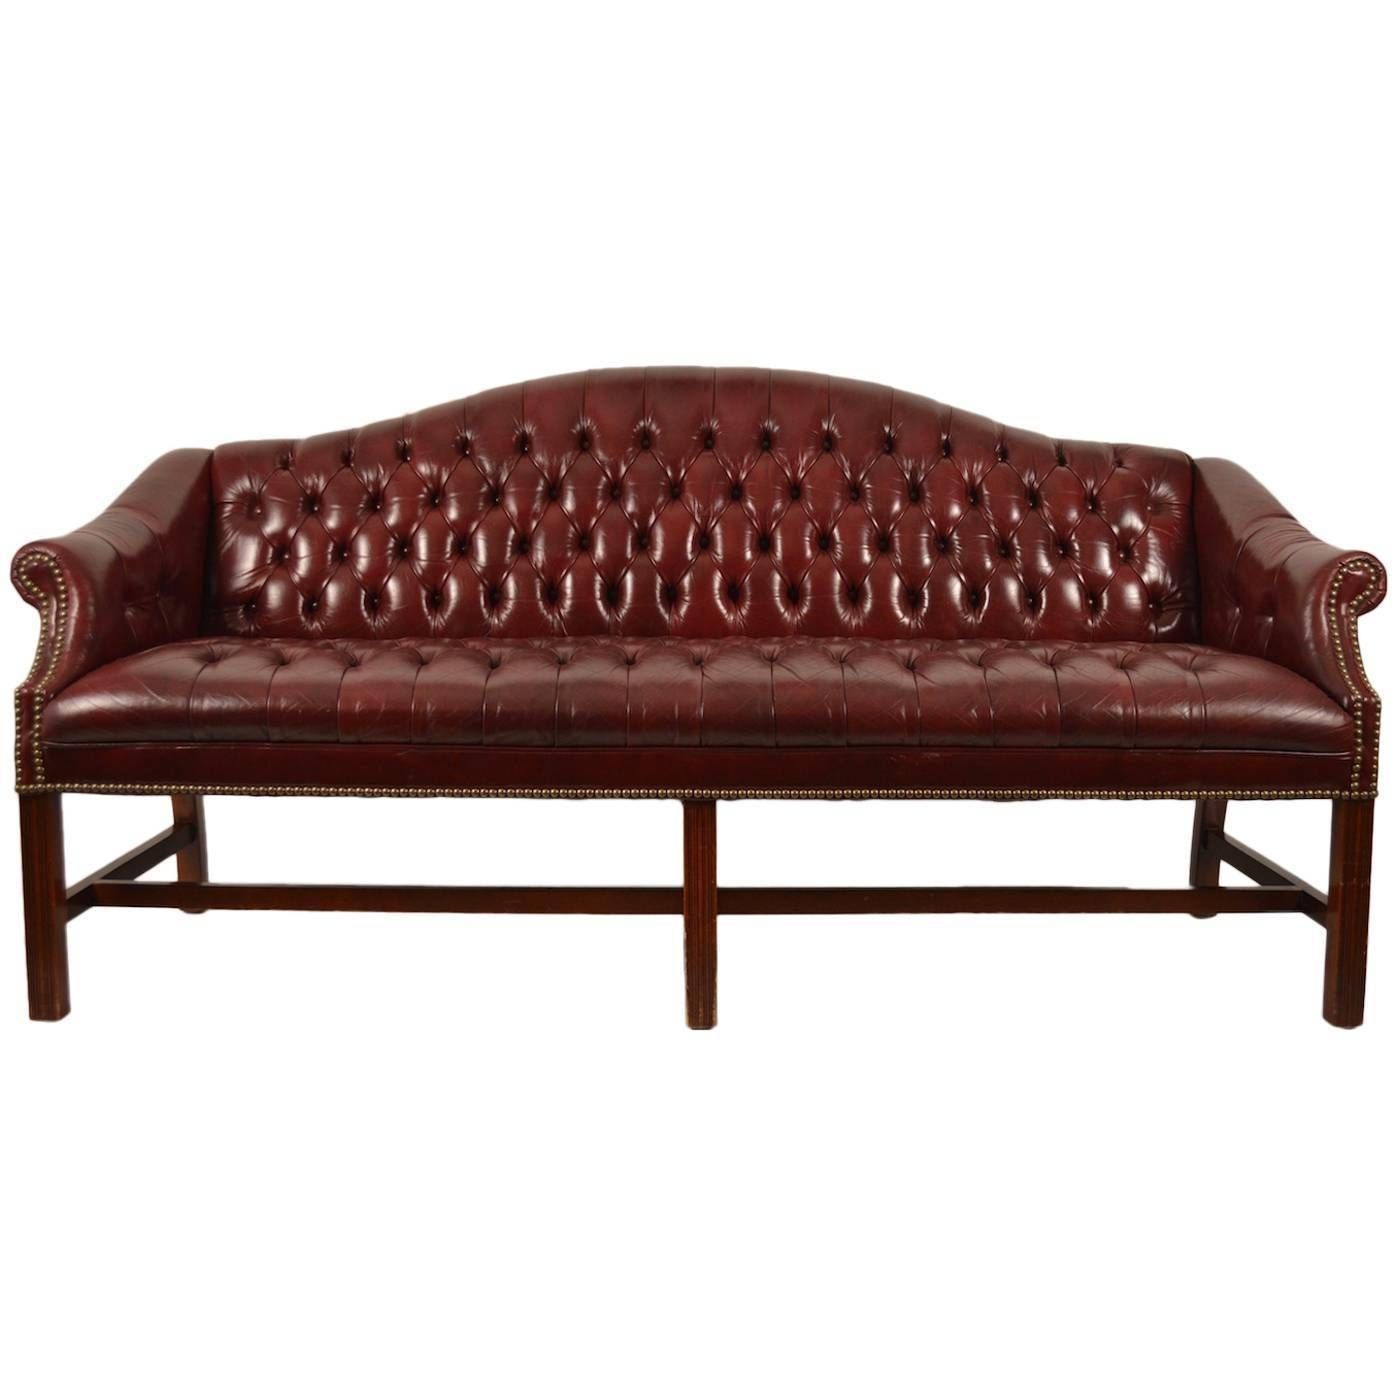 Burgundy Leather Chippendale Camelback Sofa At 1stdibs Pertaining To Chippendale Camelback Sofas (View 5 of 15)